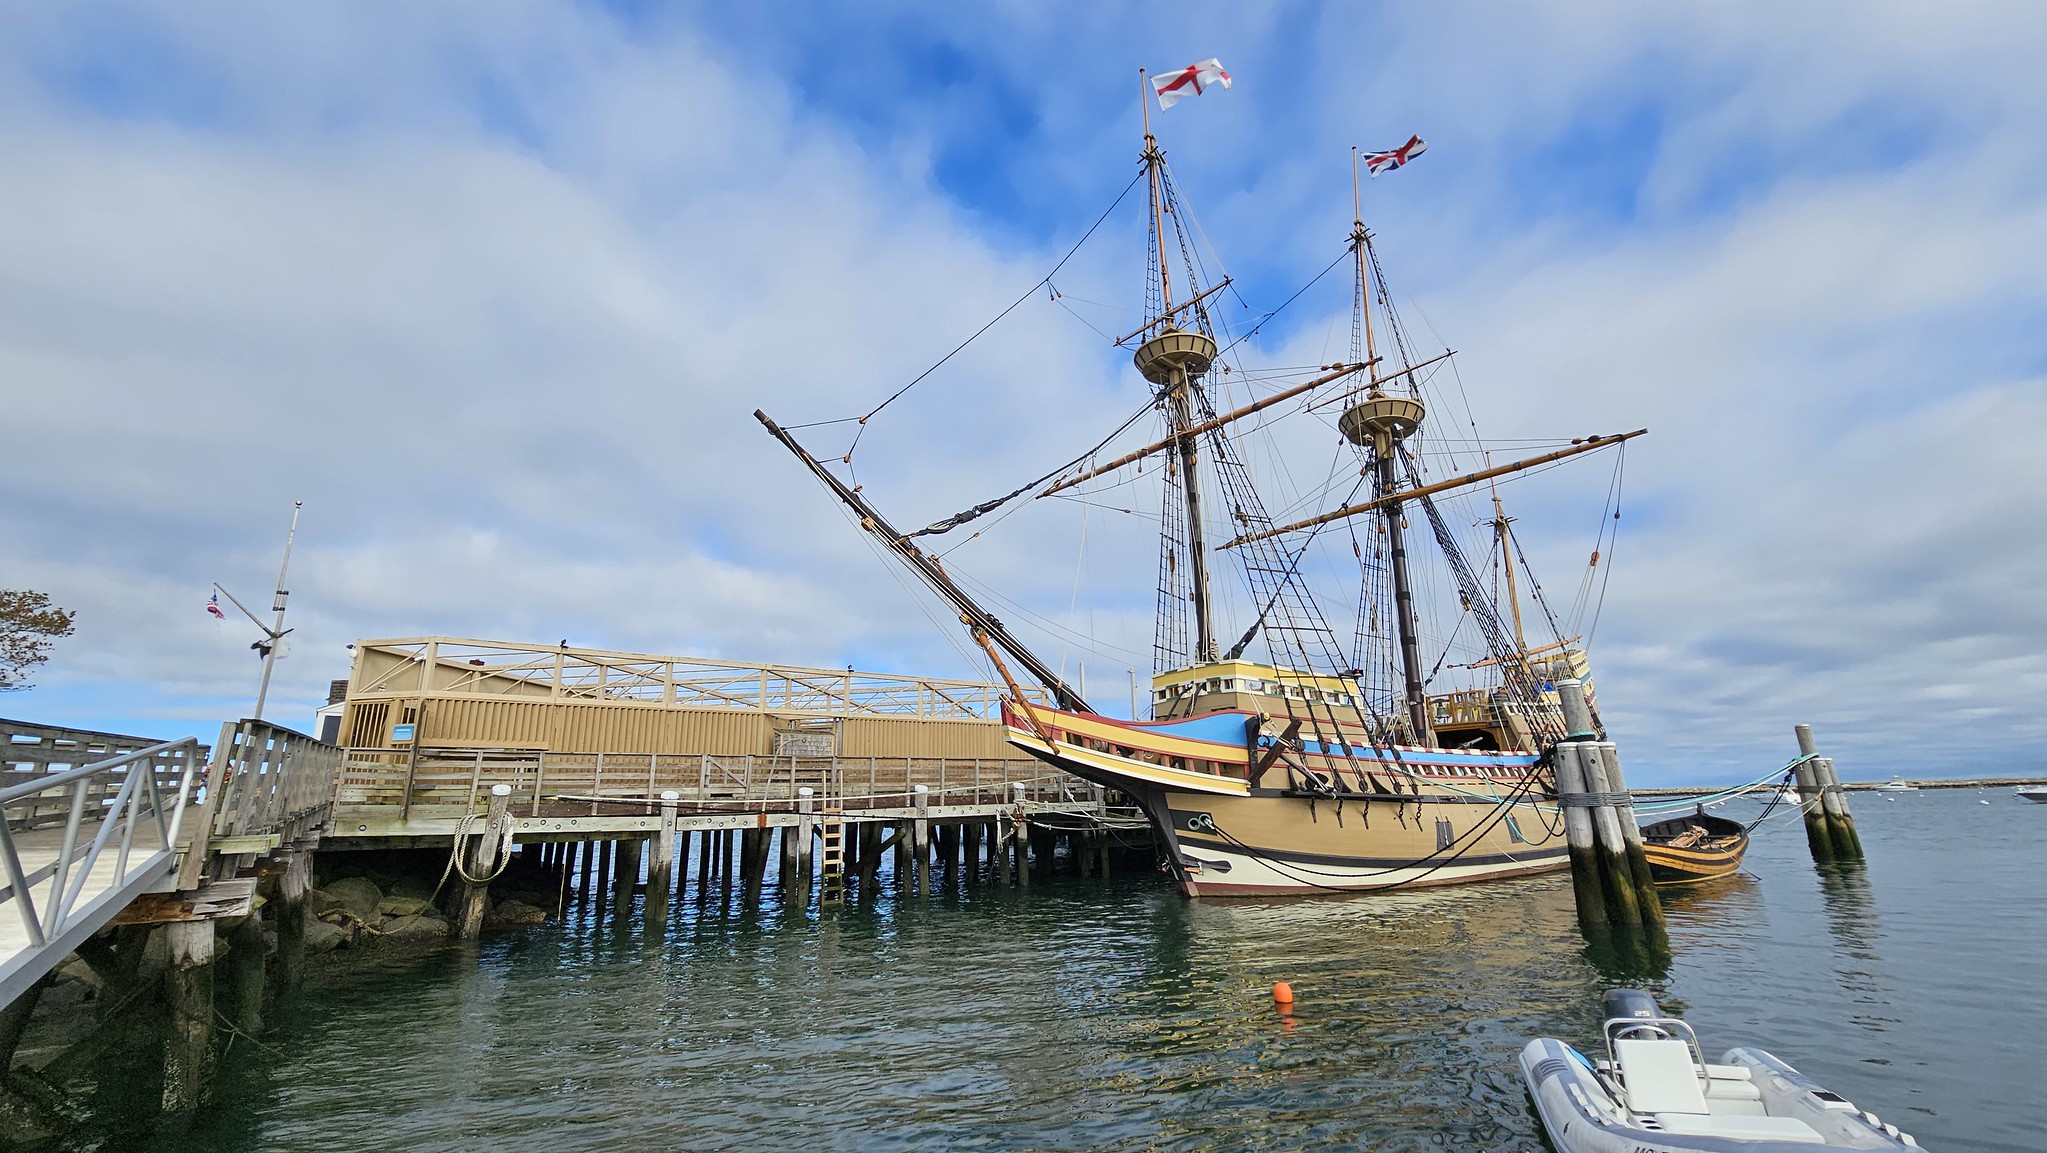 The Mayflower in Plymouth